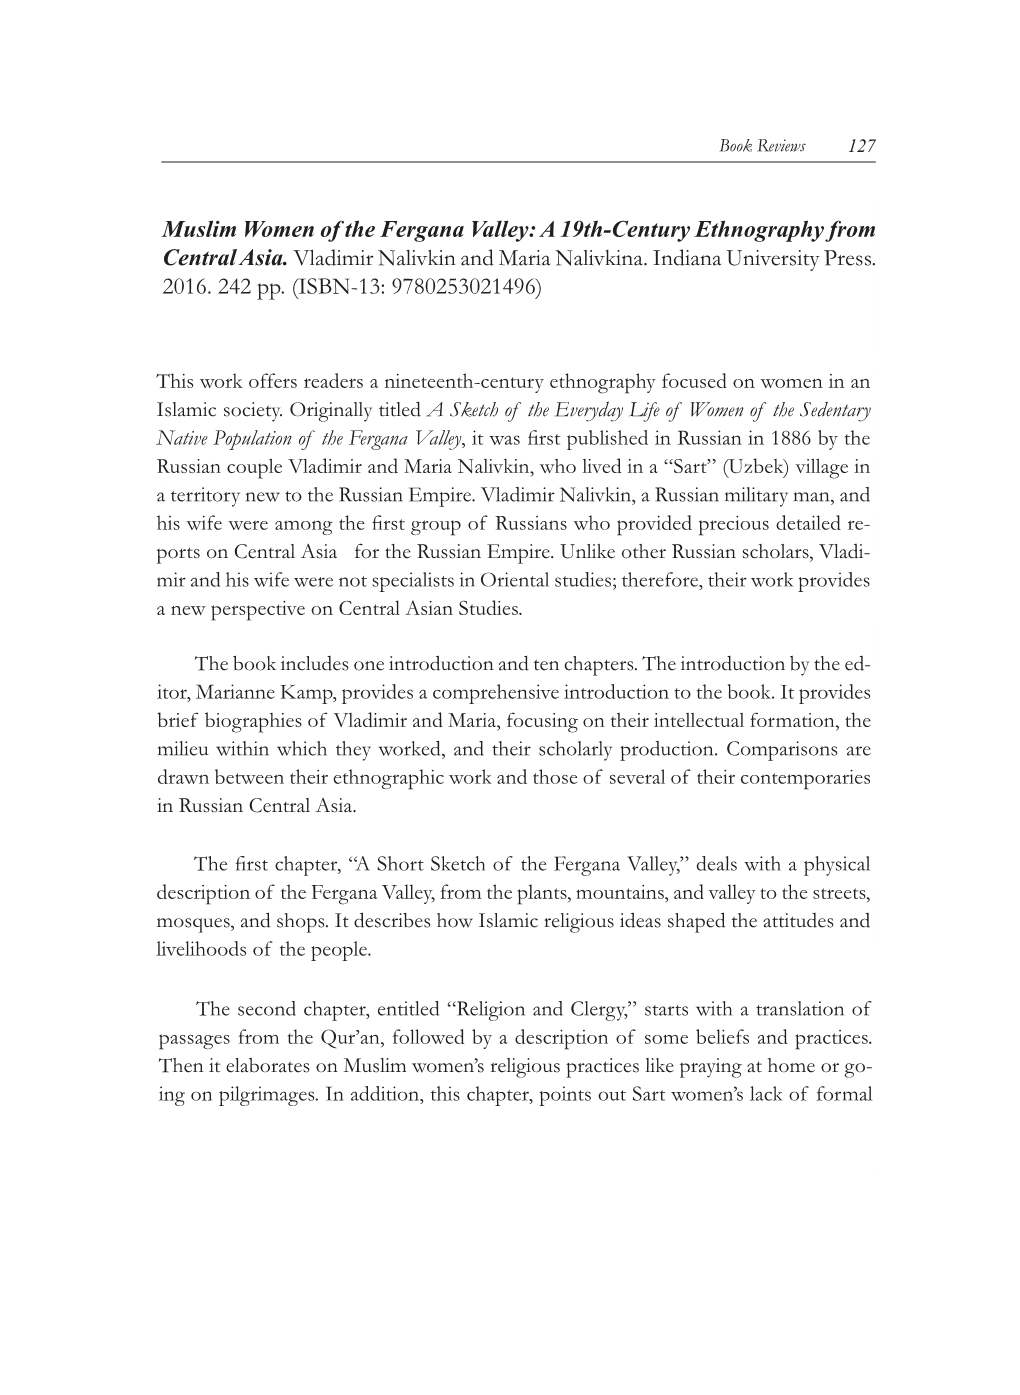 Muslim Women of the Fergana Valley: a 19Th-Century Ethnography from Central Asia